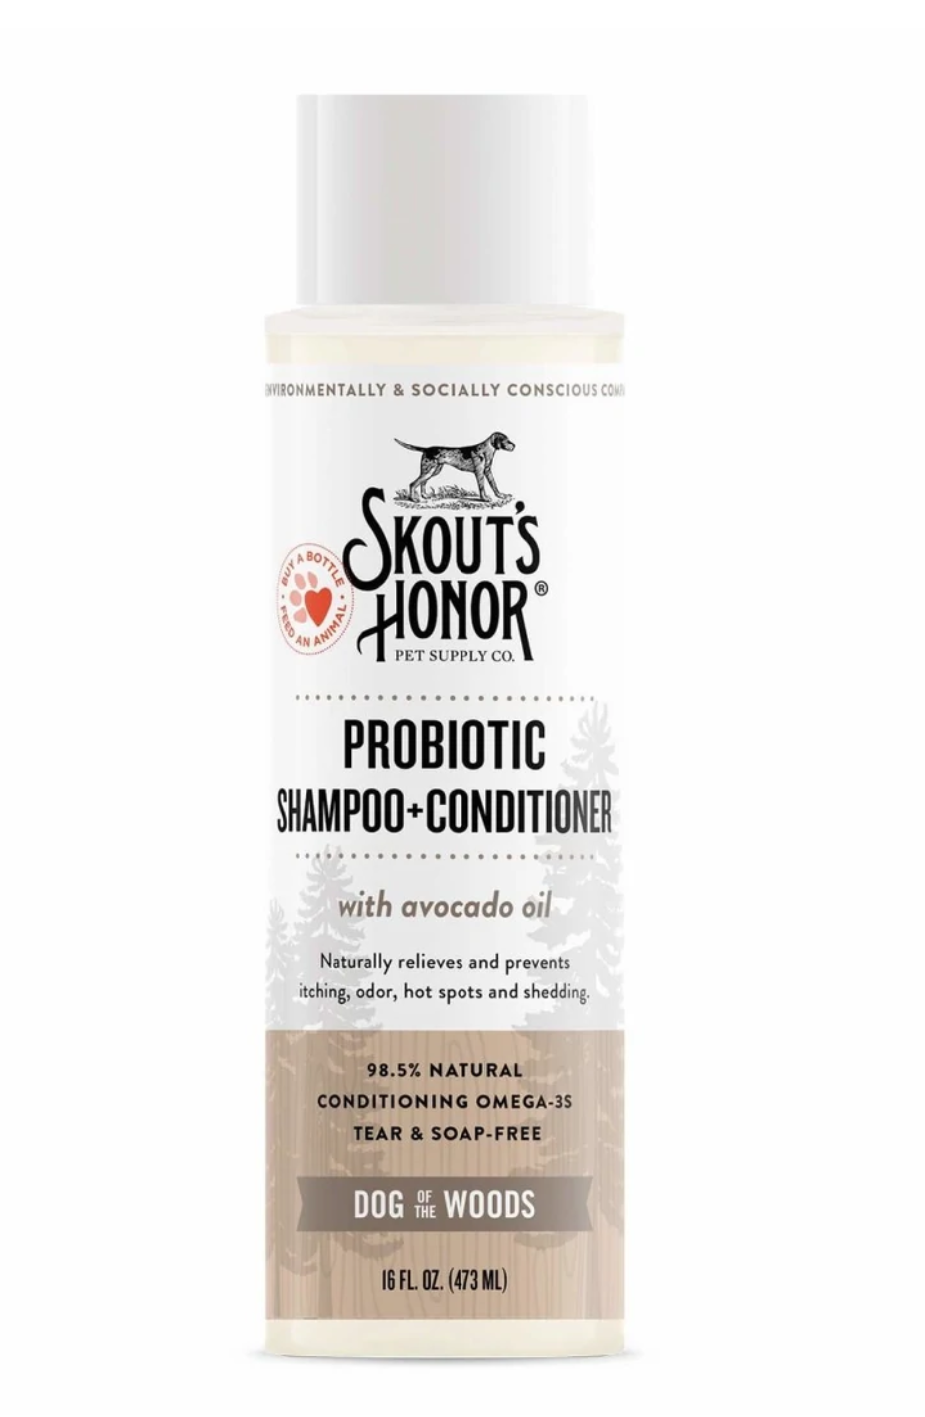 Skout's Honor 2in1 Shampoo/Conditioner Dog of the Woods *